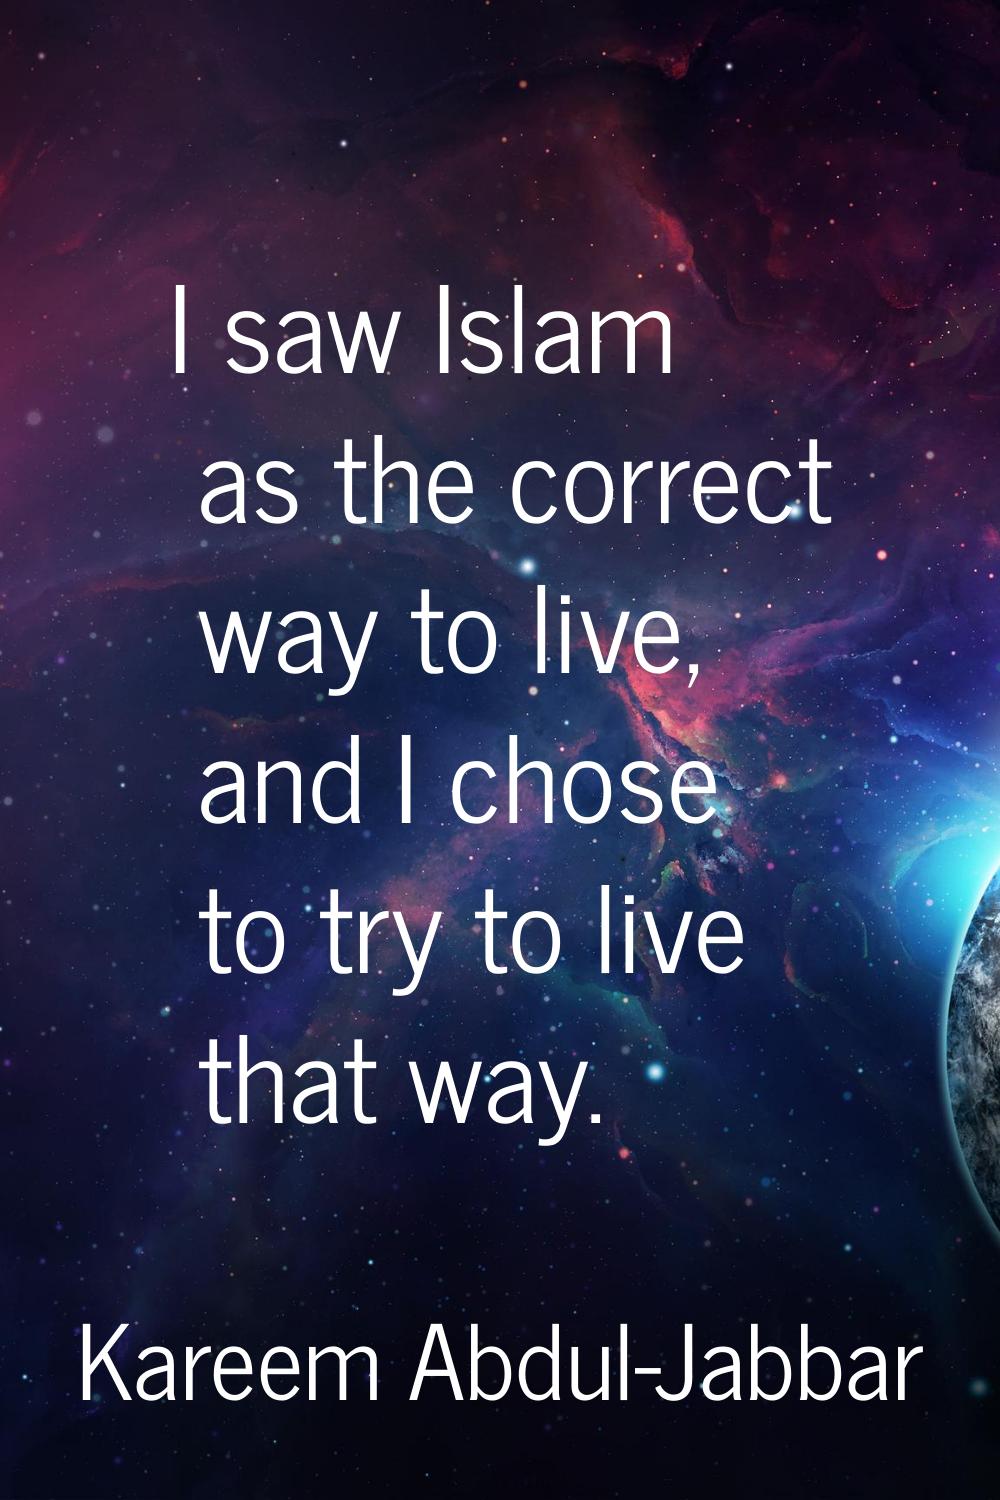 I saw Islam as the correct way to live, and I chose to try to live that way.